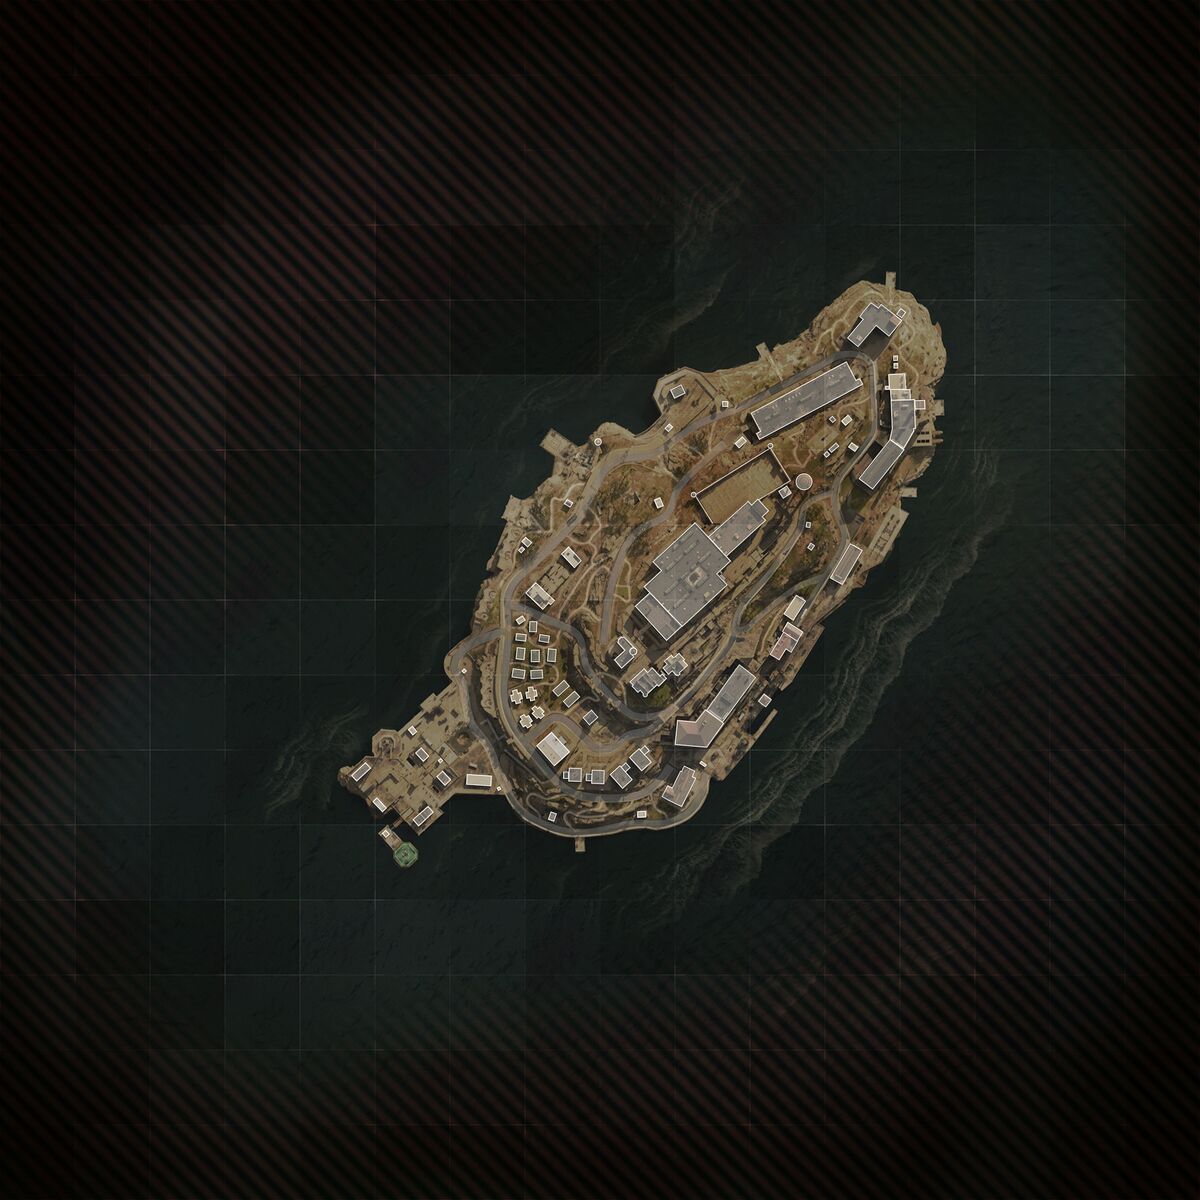 Warzone Rebirth Island Reinforced: What is it?